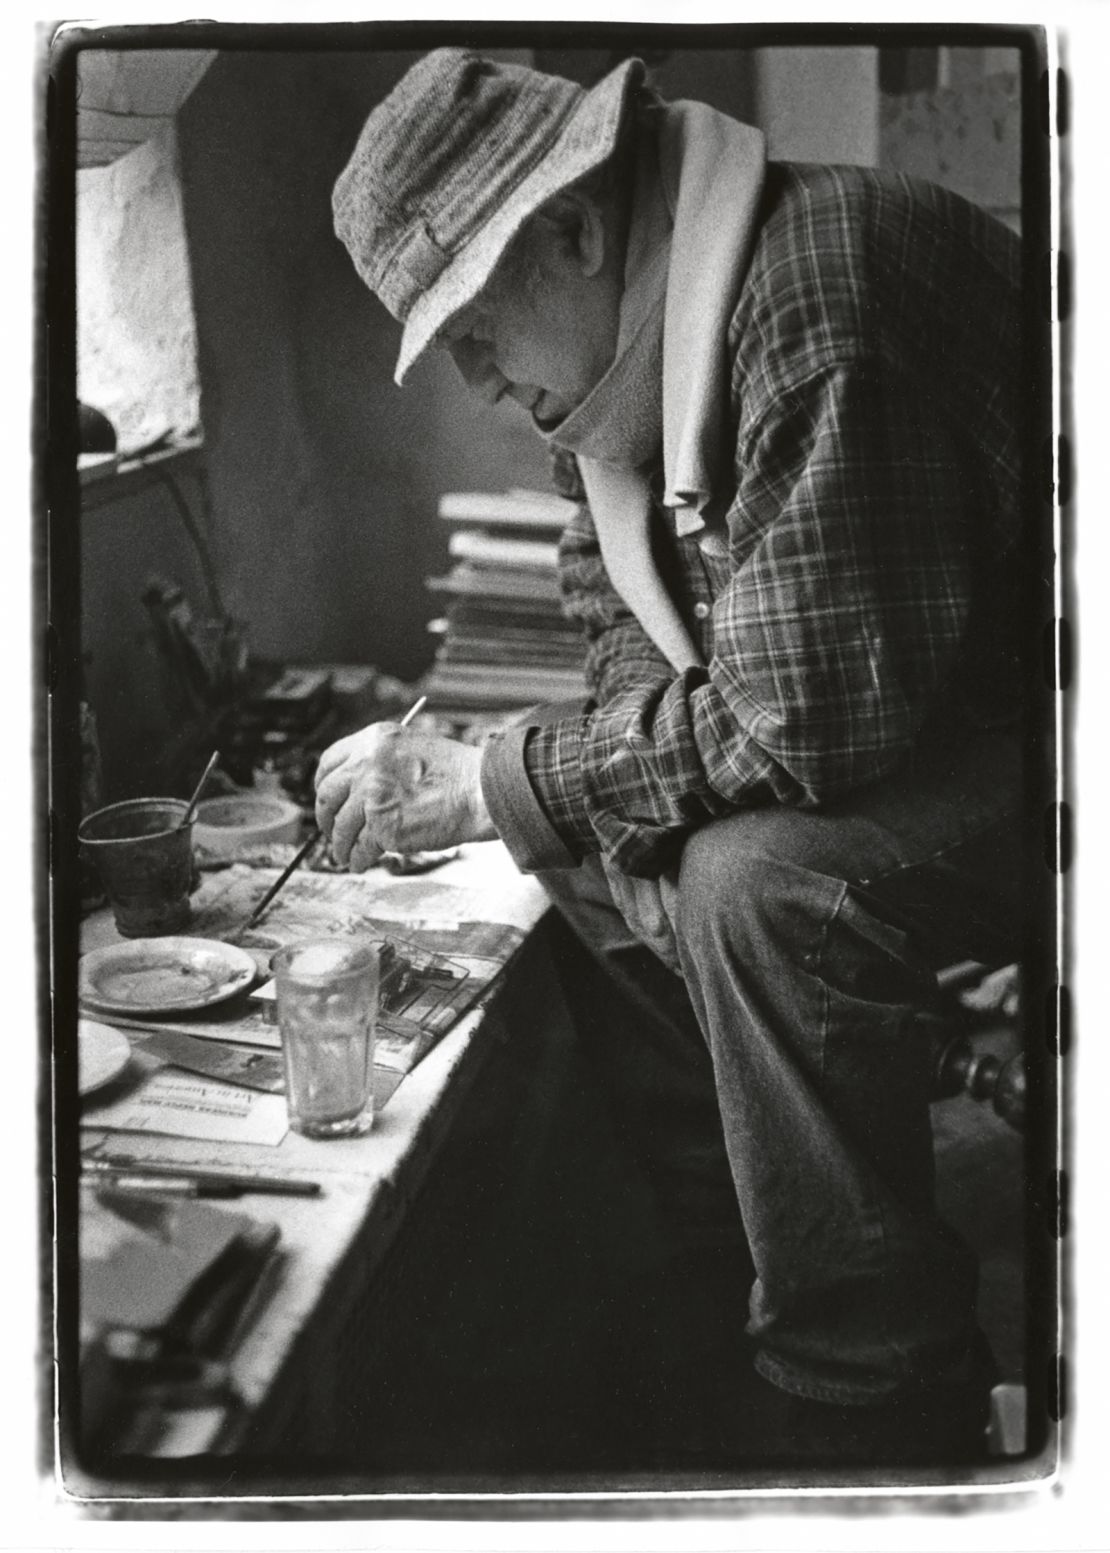 An 80-year-old Leiter in his studio in 2003. Photograph by Anders Goldfarb.